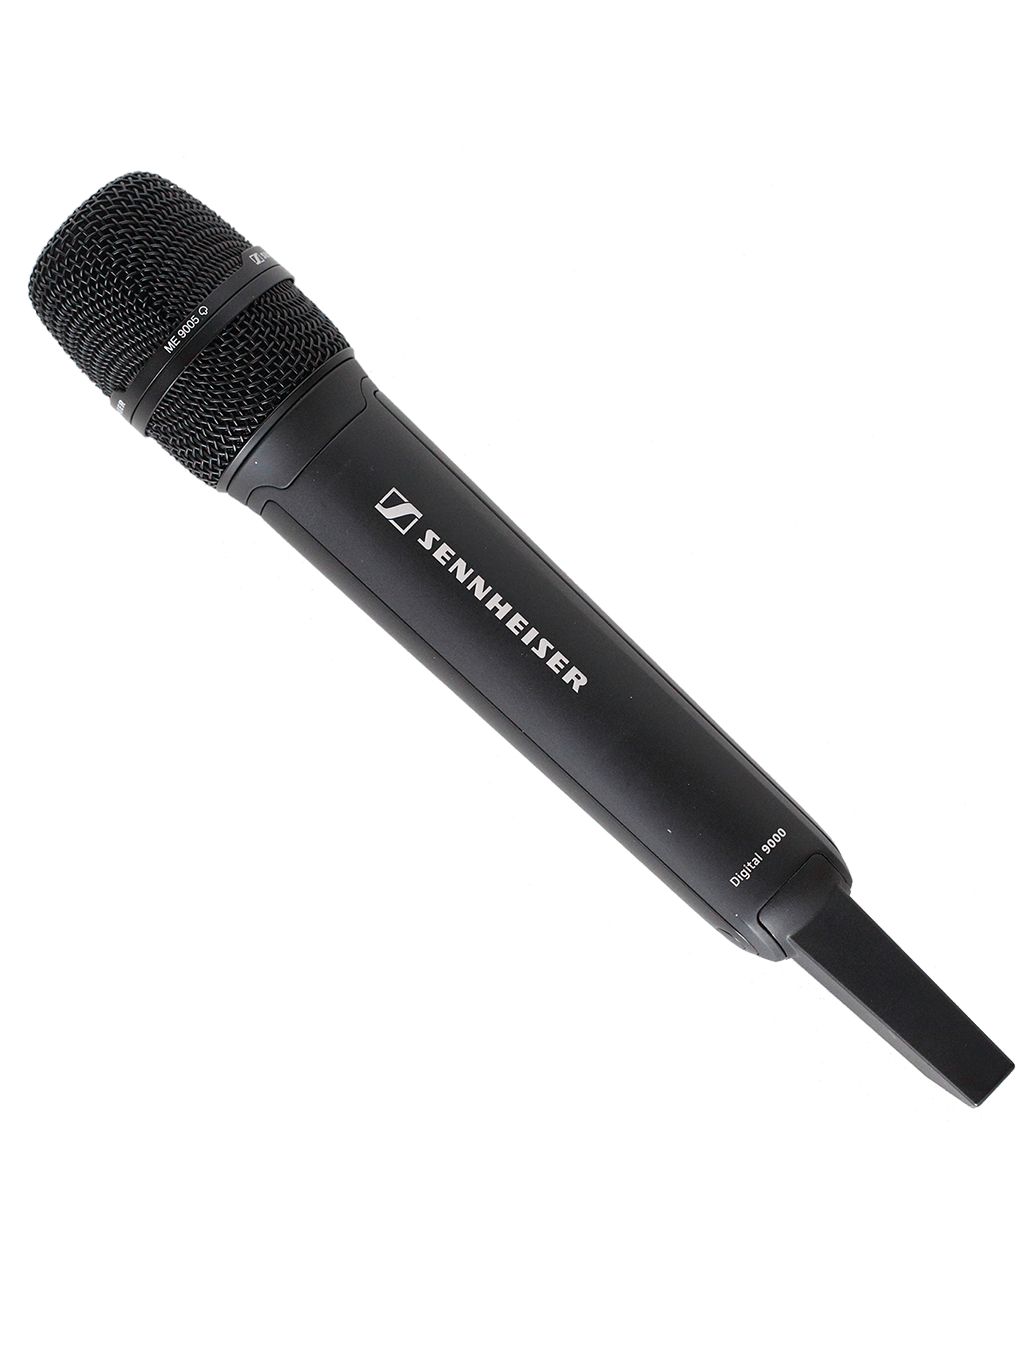 Photo: Services sound engineering microphone